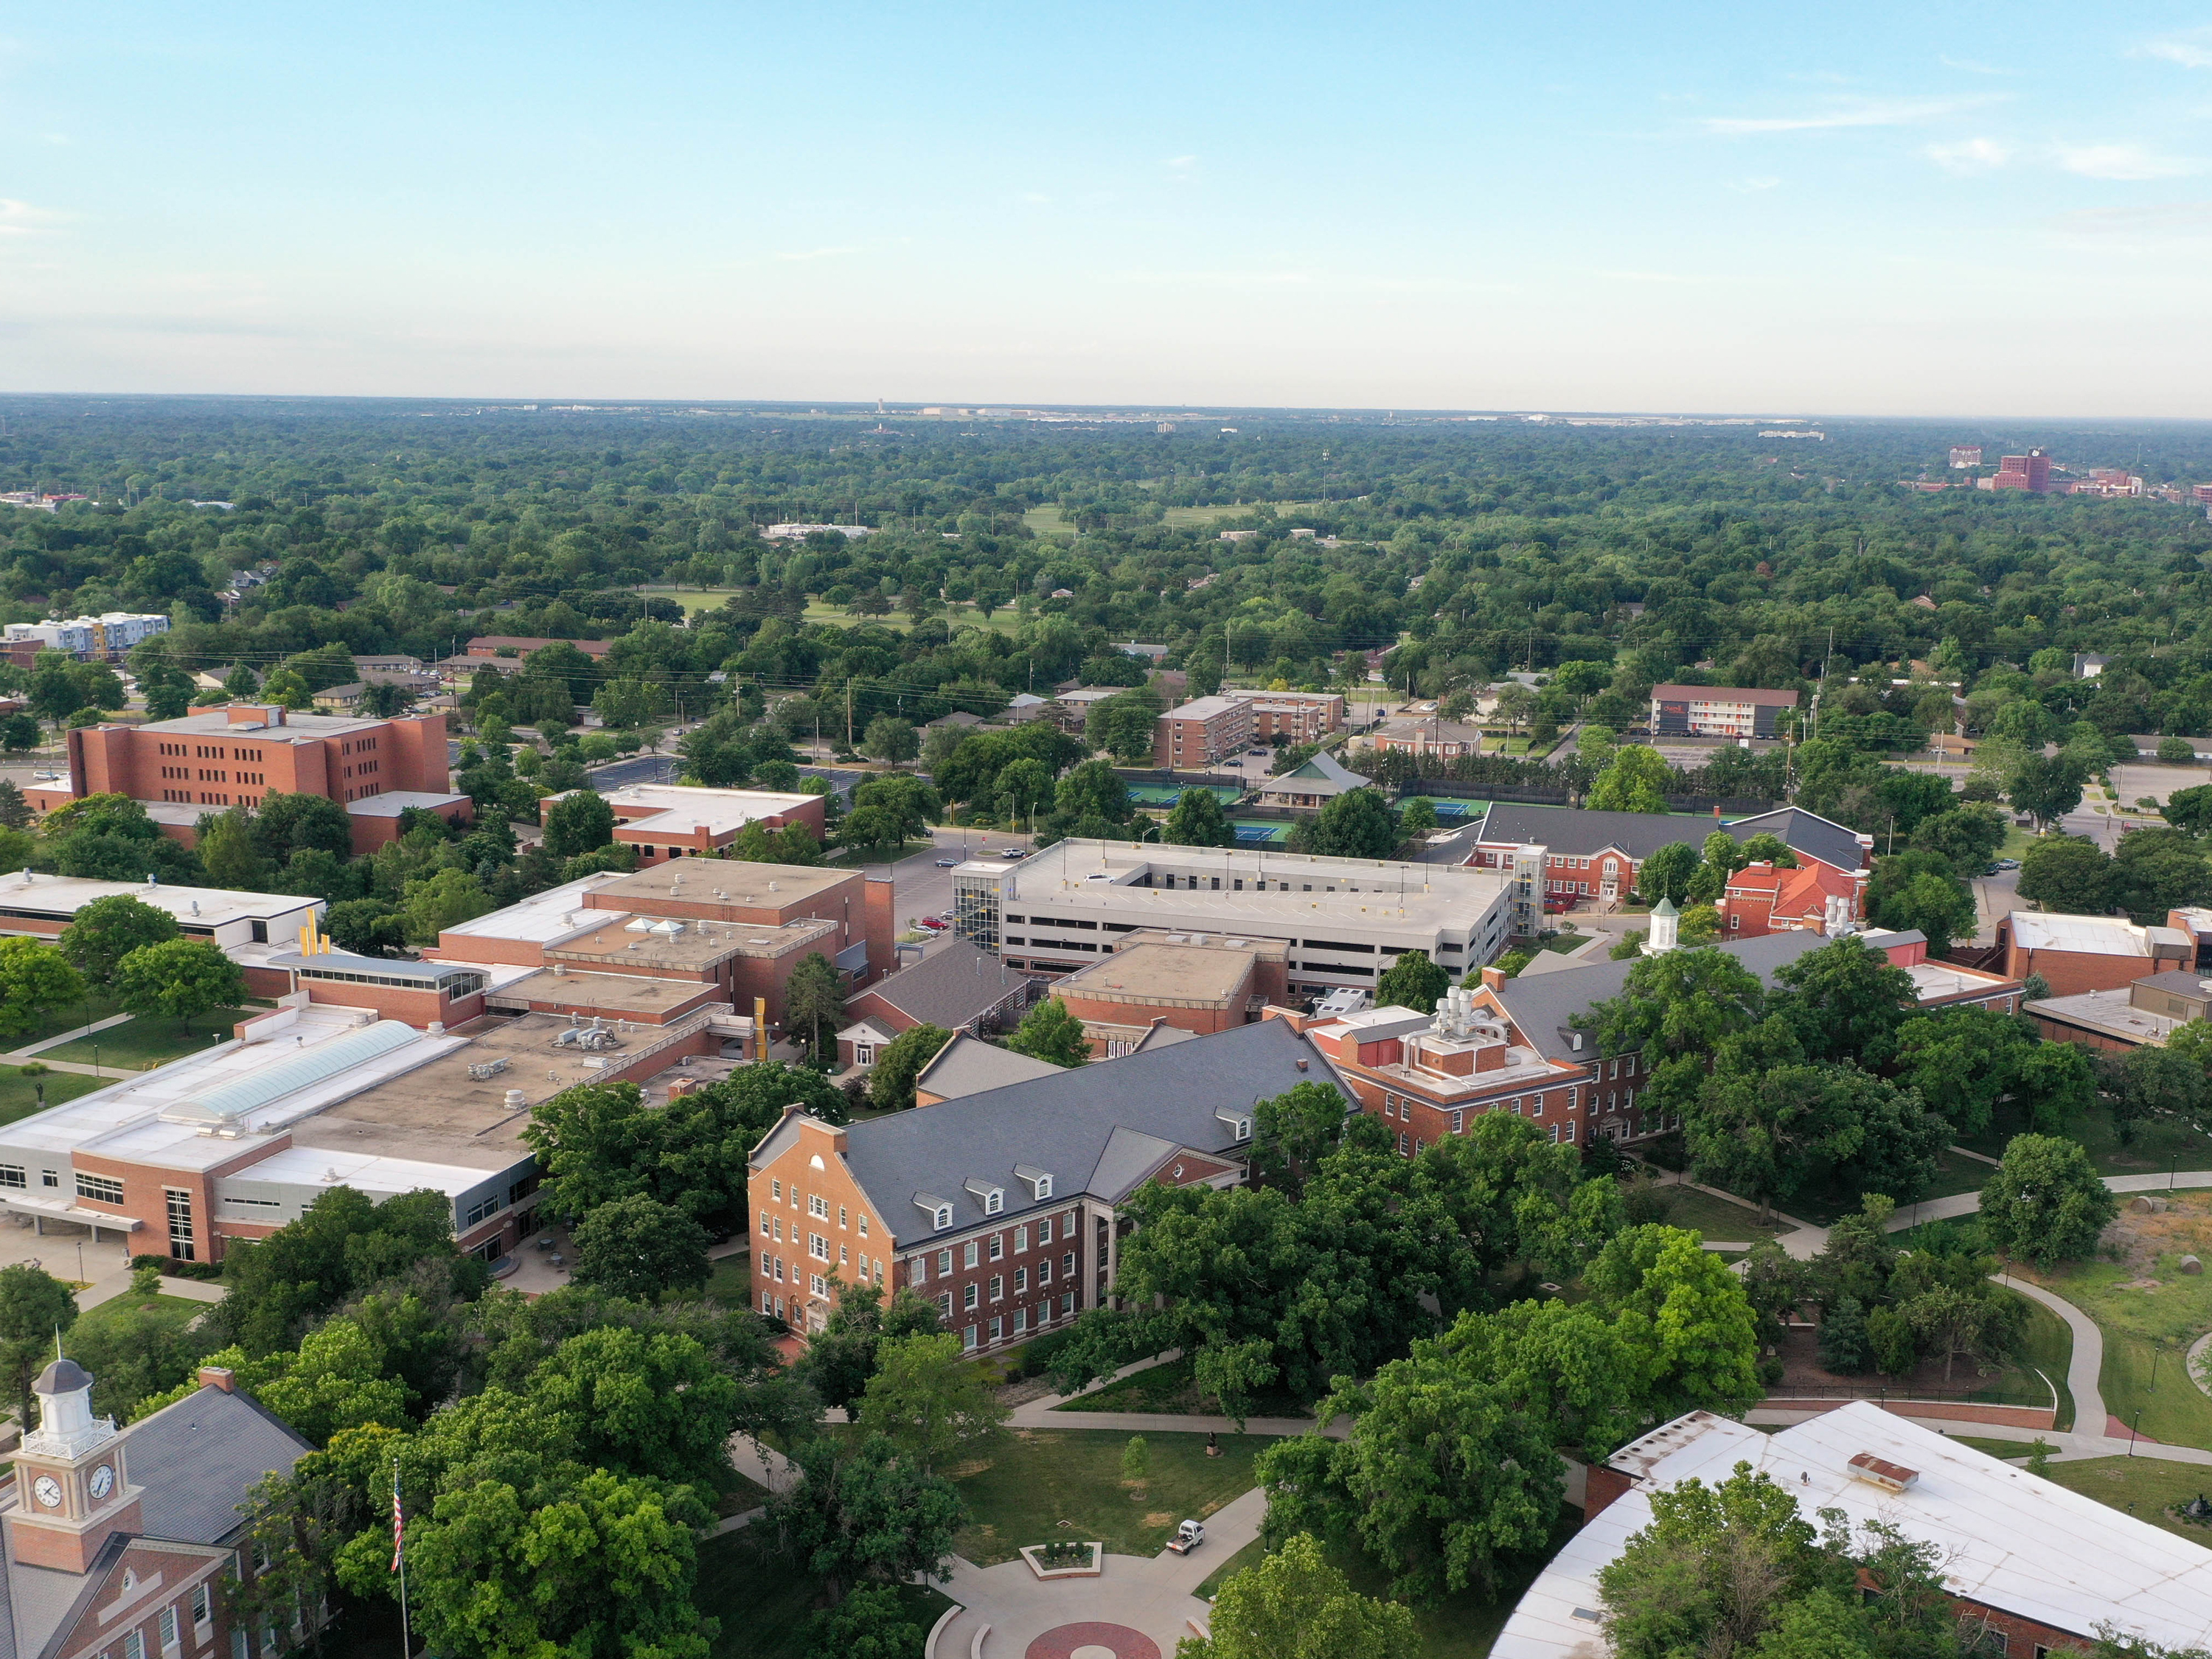 Campus Drone looking south